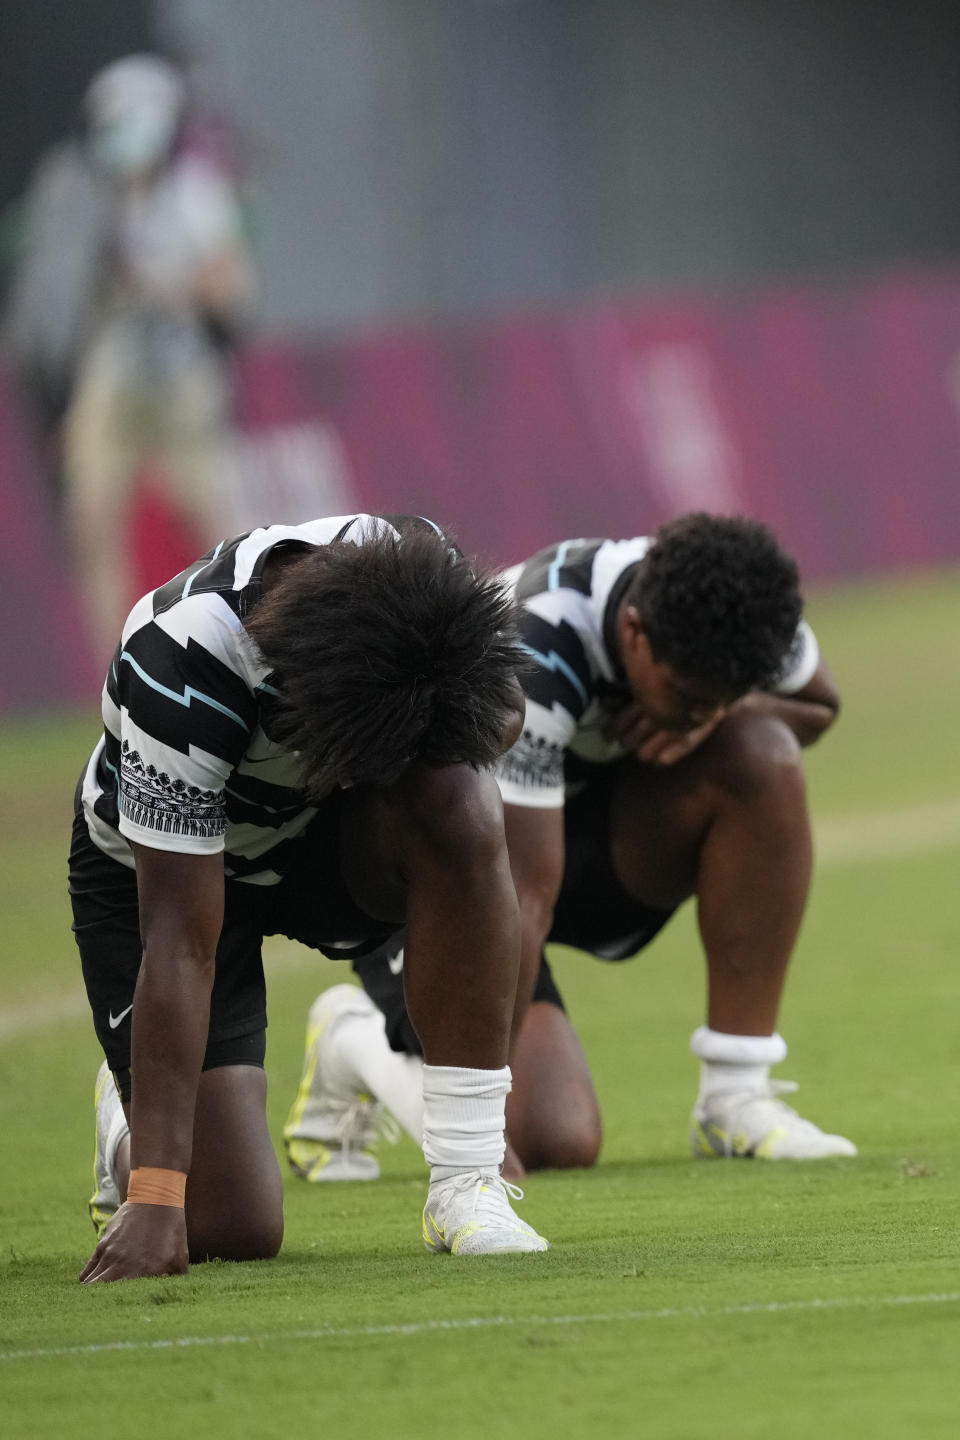 Fiji players kneel on the pitch after defeating Britain in the women's rugby bronze medal match at the 2020 Summer Olympics, Saturday, July 31, 2021 in Tokyo, Japan. (AP Photo/Shuji Kajiyama)